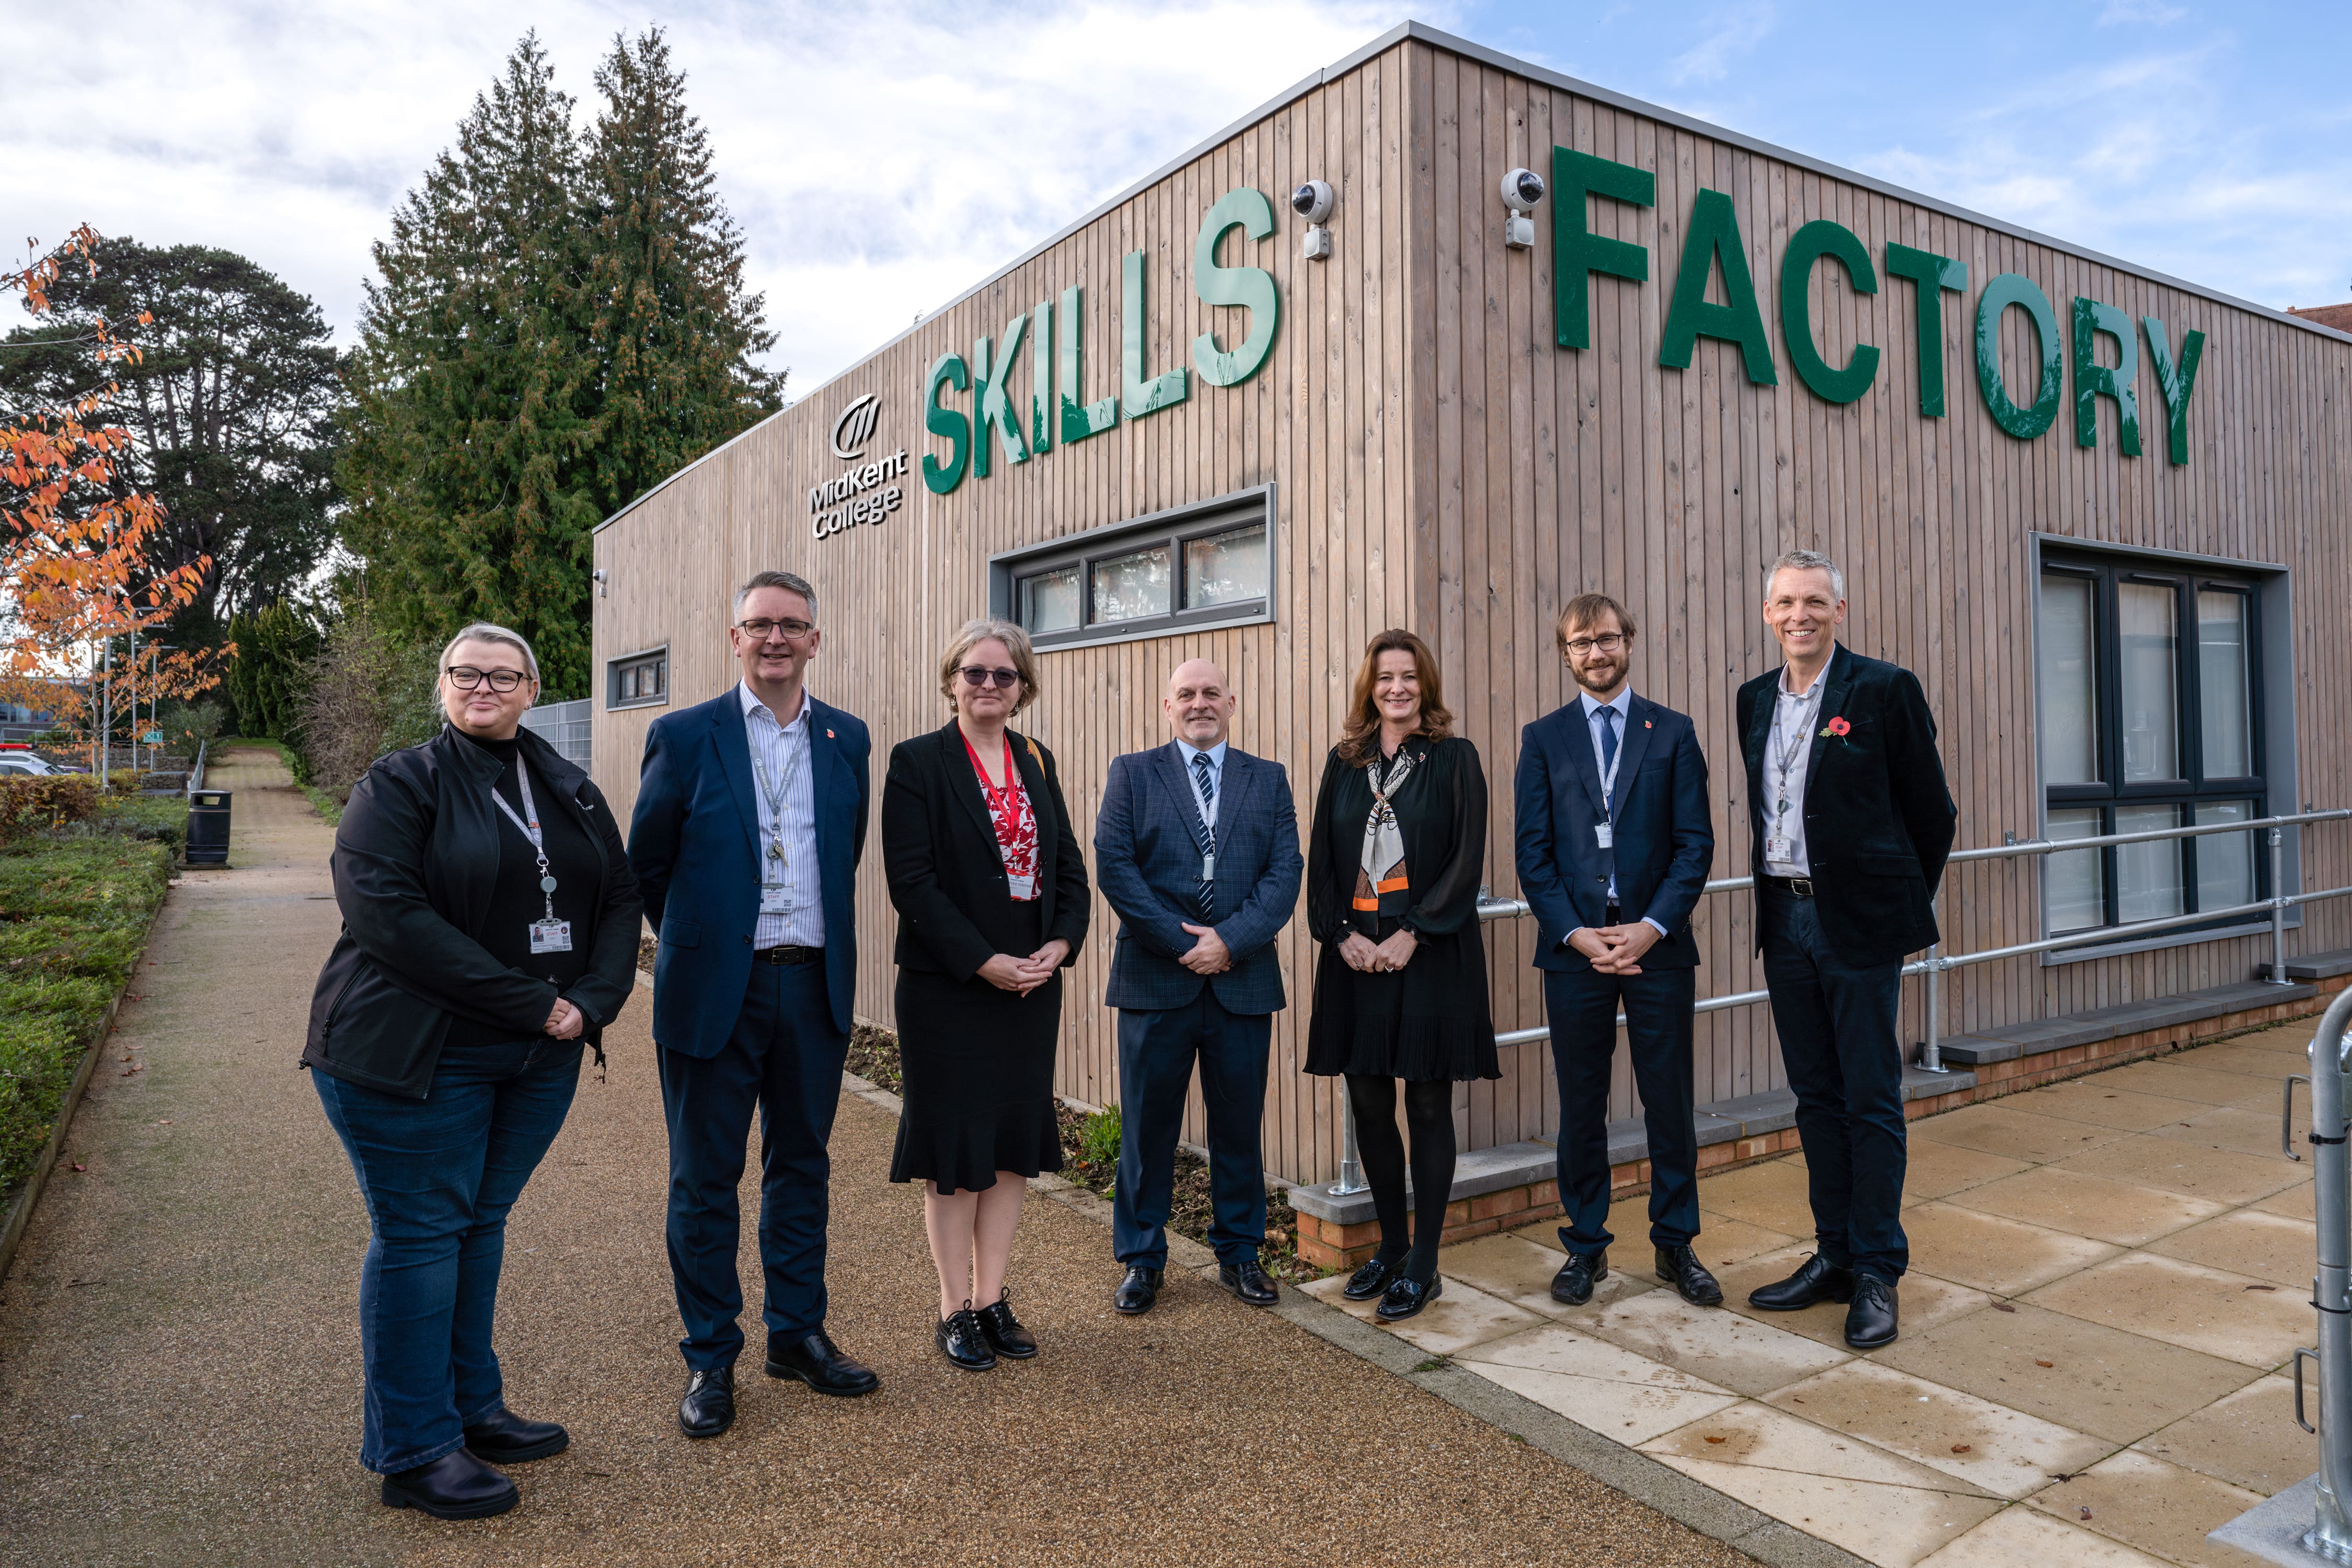  The Skills Factory and Home Energy Centre at the Maidstone Campus